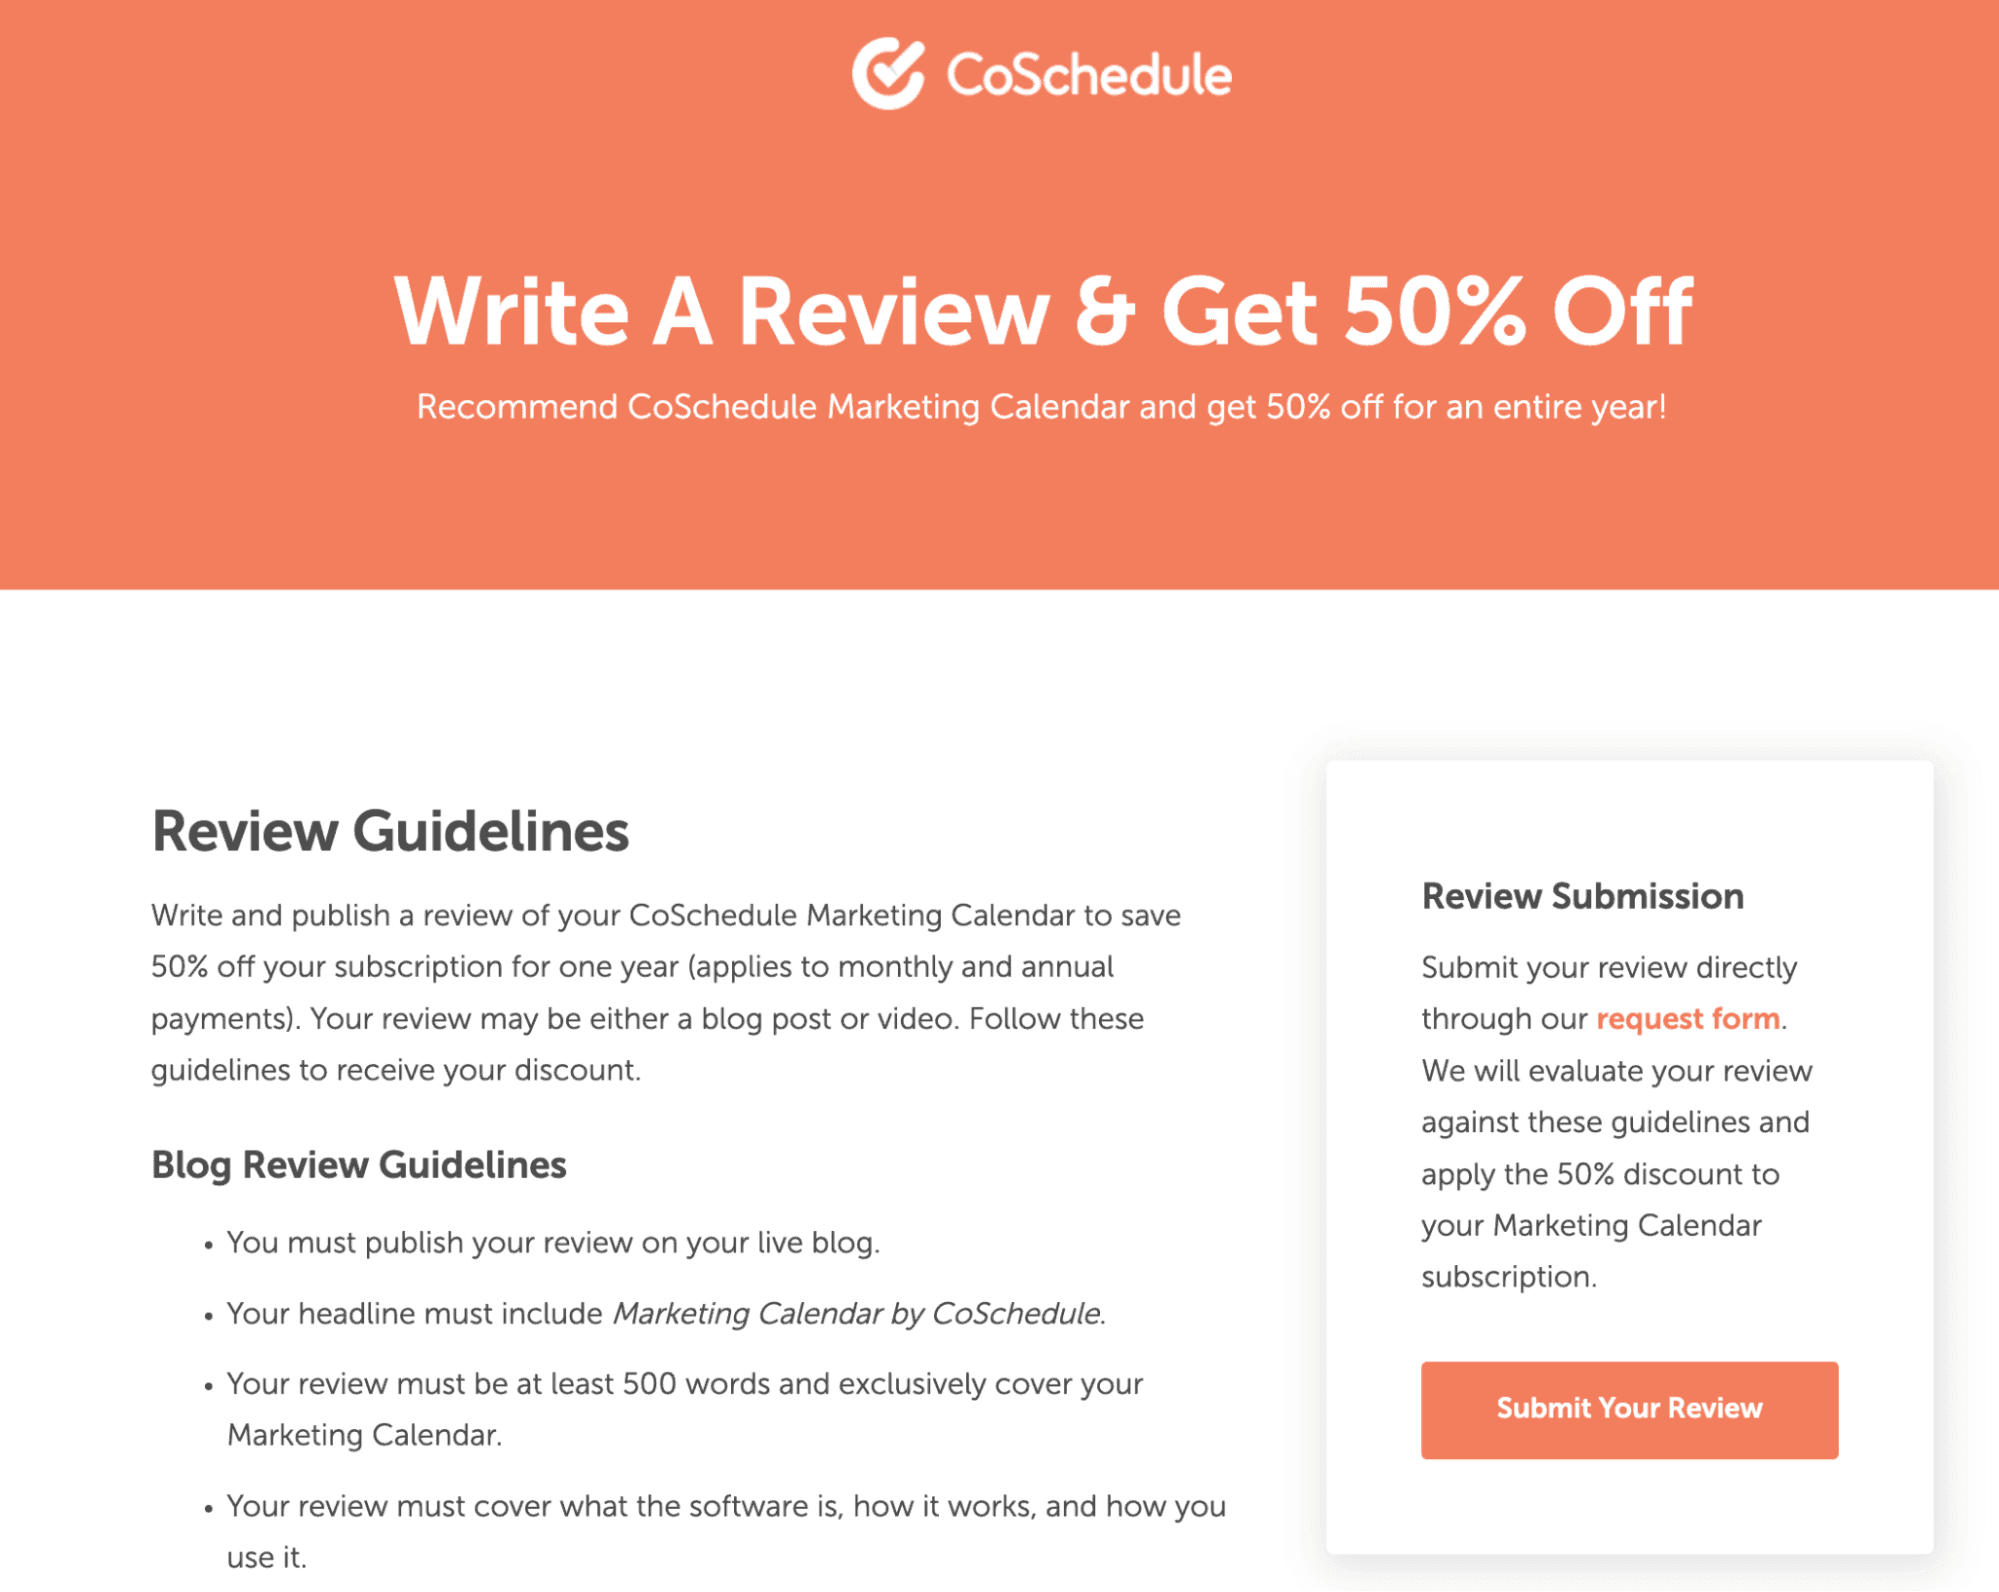 The guidelines of the CoSchedule loyalty program.